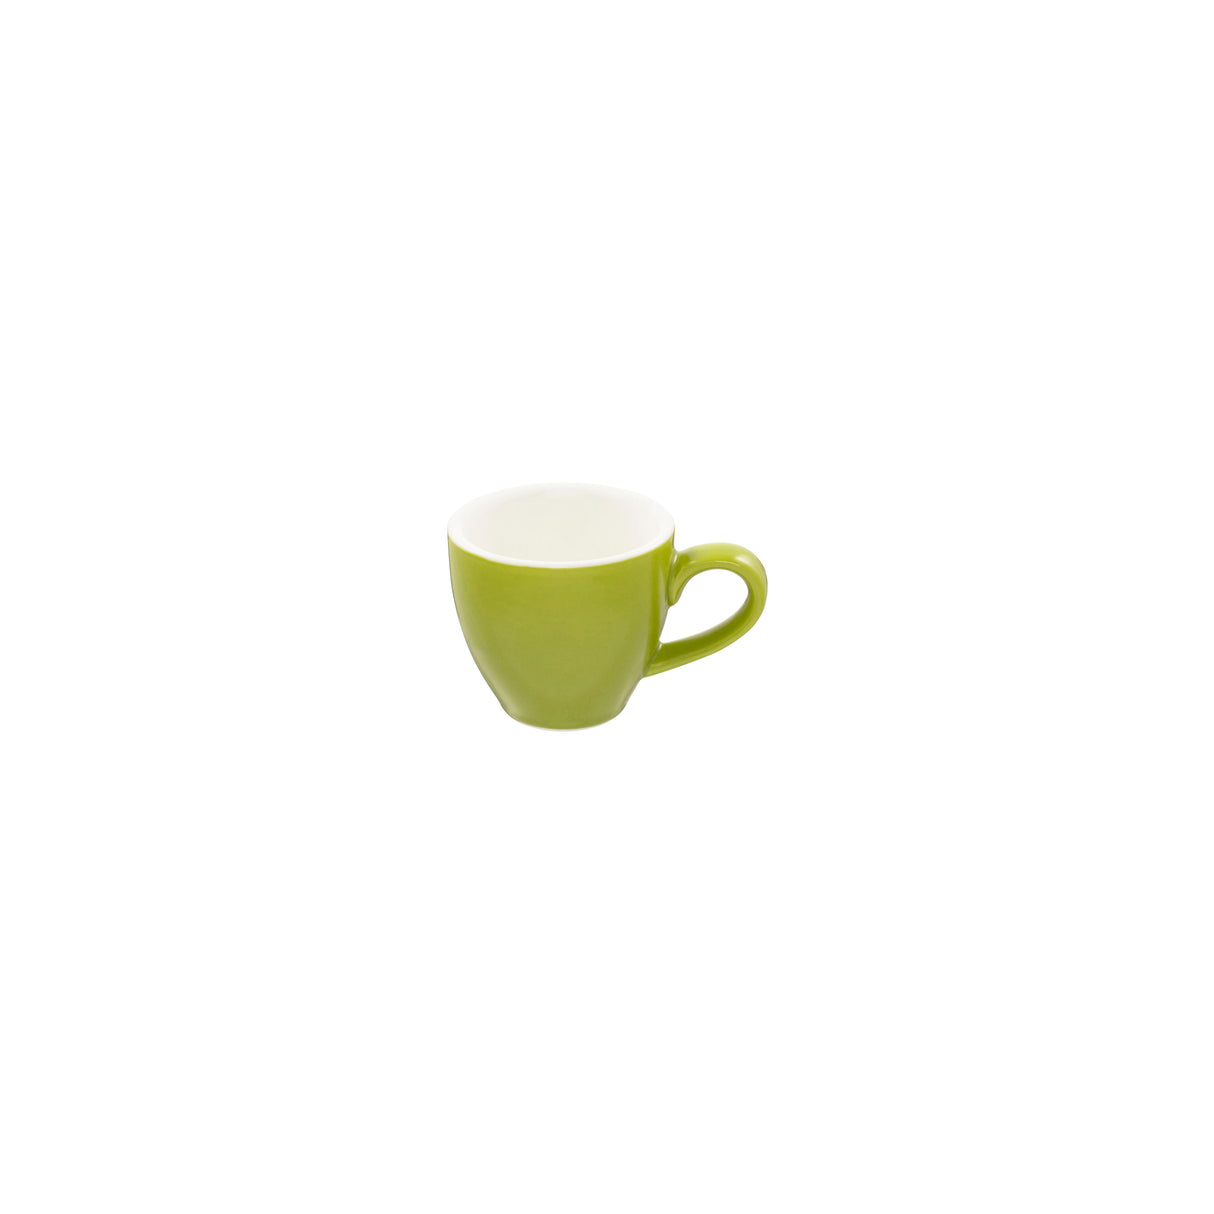 Espresso Cup - Bamboo, 75ml: Pack of 6